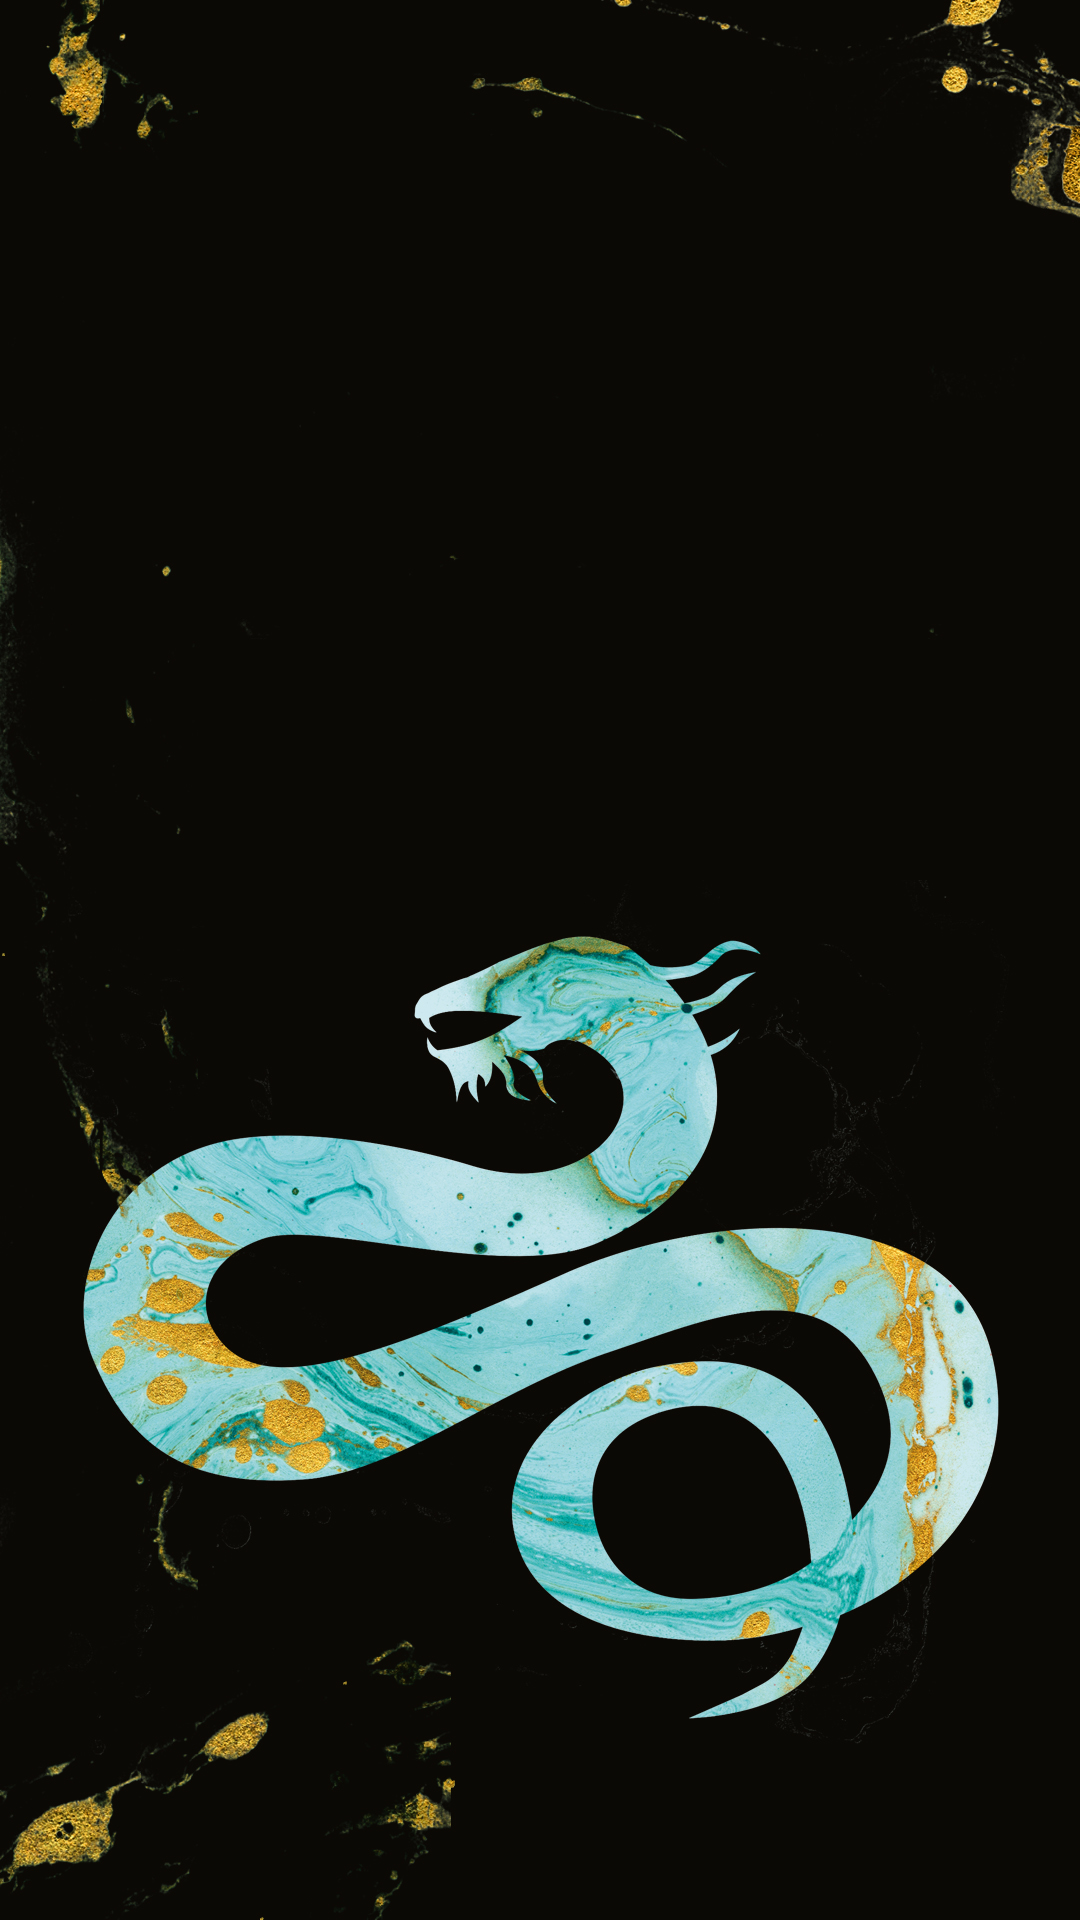 A stylized blue and turquoise serpent with golden speckles coils against a black textured background, giving a dramatic and mystical appearance.